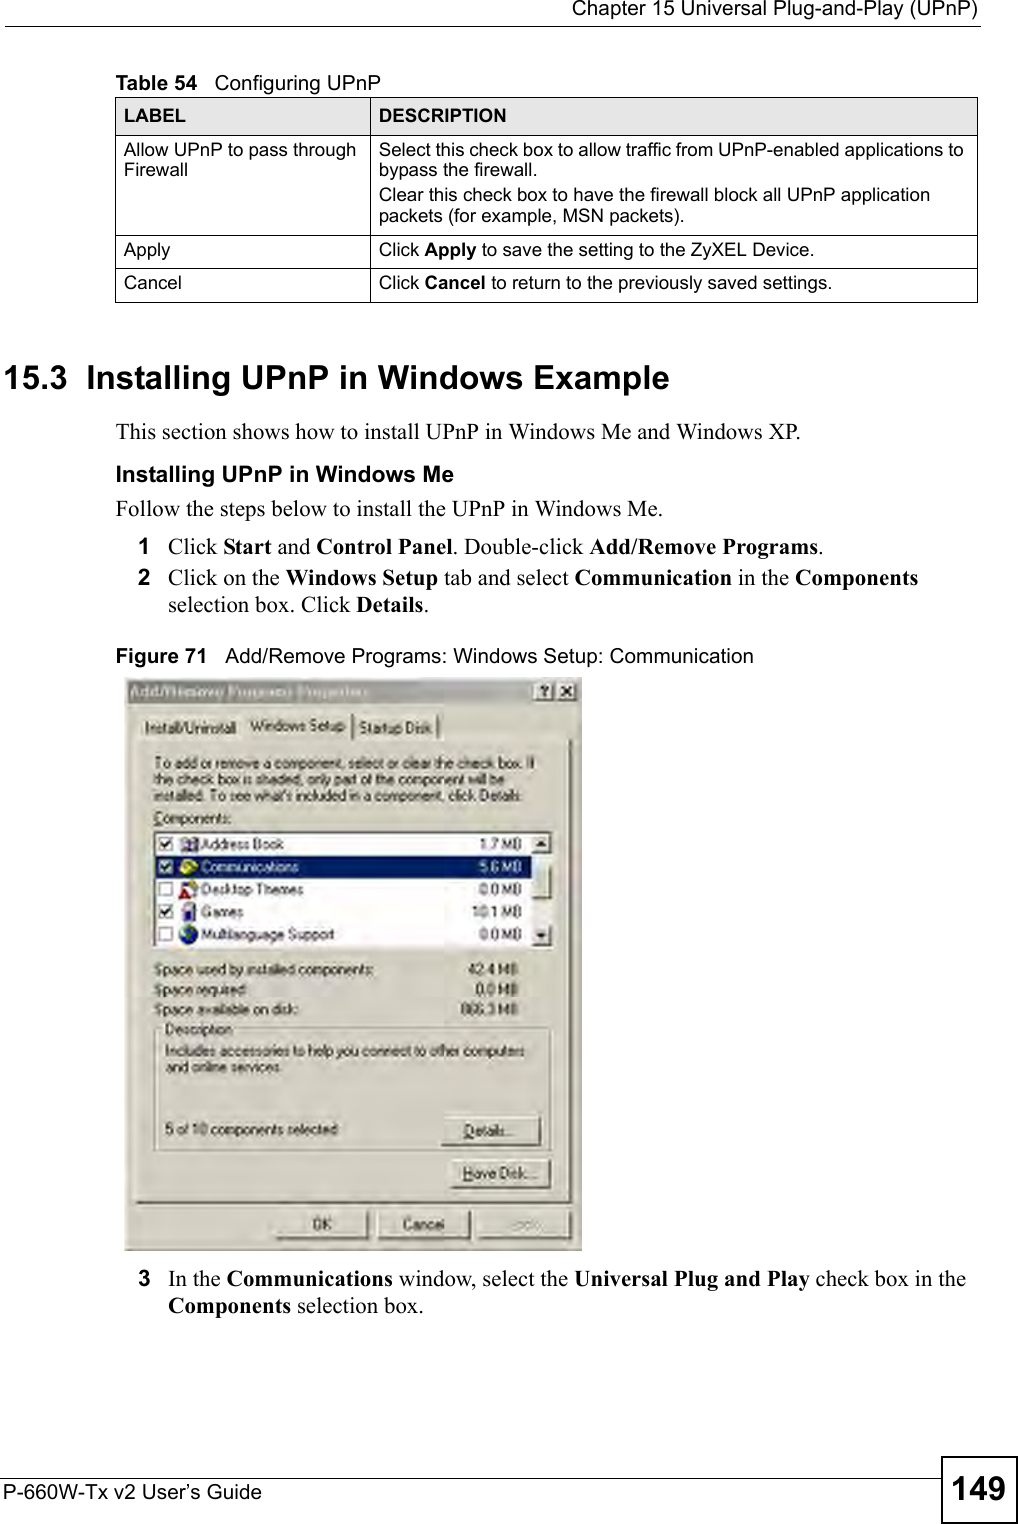  Chapter 15 Universal Plug-and-Play (UPnP)P-660W-Tx v2 User’s Guide 14915.3  Installing UPnP in Windows ExampleThis section shows how to install UPnP in Windows Me and Windows XP.  Installing UPnP in Windows MeFollow the steps below to install the UPnP in Windows Me. 1Click Start and Control Panel. Double-click Add/Remove Programs.2Click on the Windows Setup tab and select Communication in the Components selection box. Click Details.  Figure 71   Add/Remove Programs: Windows Setup: Communication 3In the Communications window, select the Universal Plug and Play check box in the Components selection box. Allow UPnP to pass through FirewallSelect this check box to allow traffic from UPnP-enabled applications to bypass the firewall. Clear this check box to have the firewall block all UPnP application packets (for example, MSN packets).Apply Click Apply to save the setting to the ZyXEL Device.Cancel Click Cancel to return to the previously saved settings.Table 54   Configuring UPnPLABEL DESCRIPTION